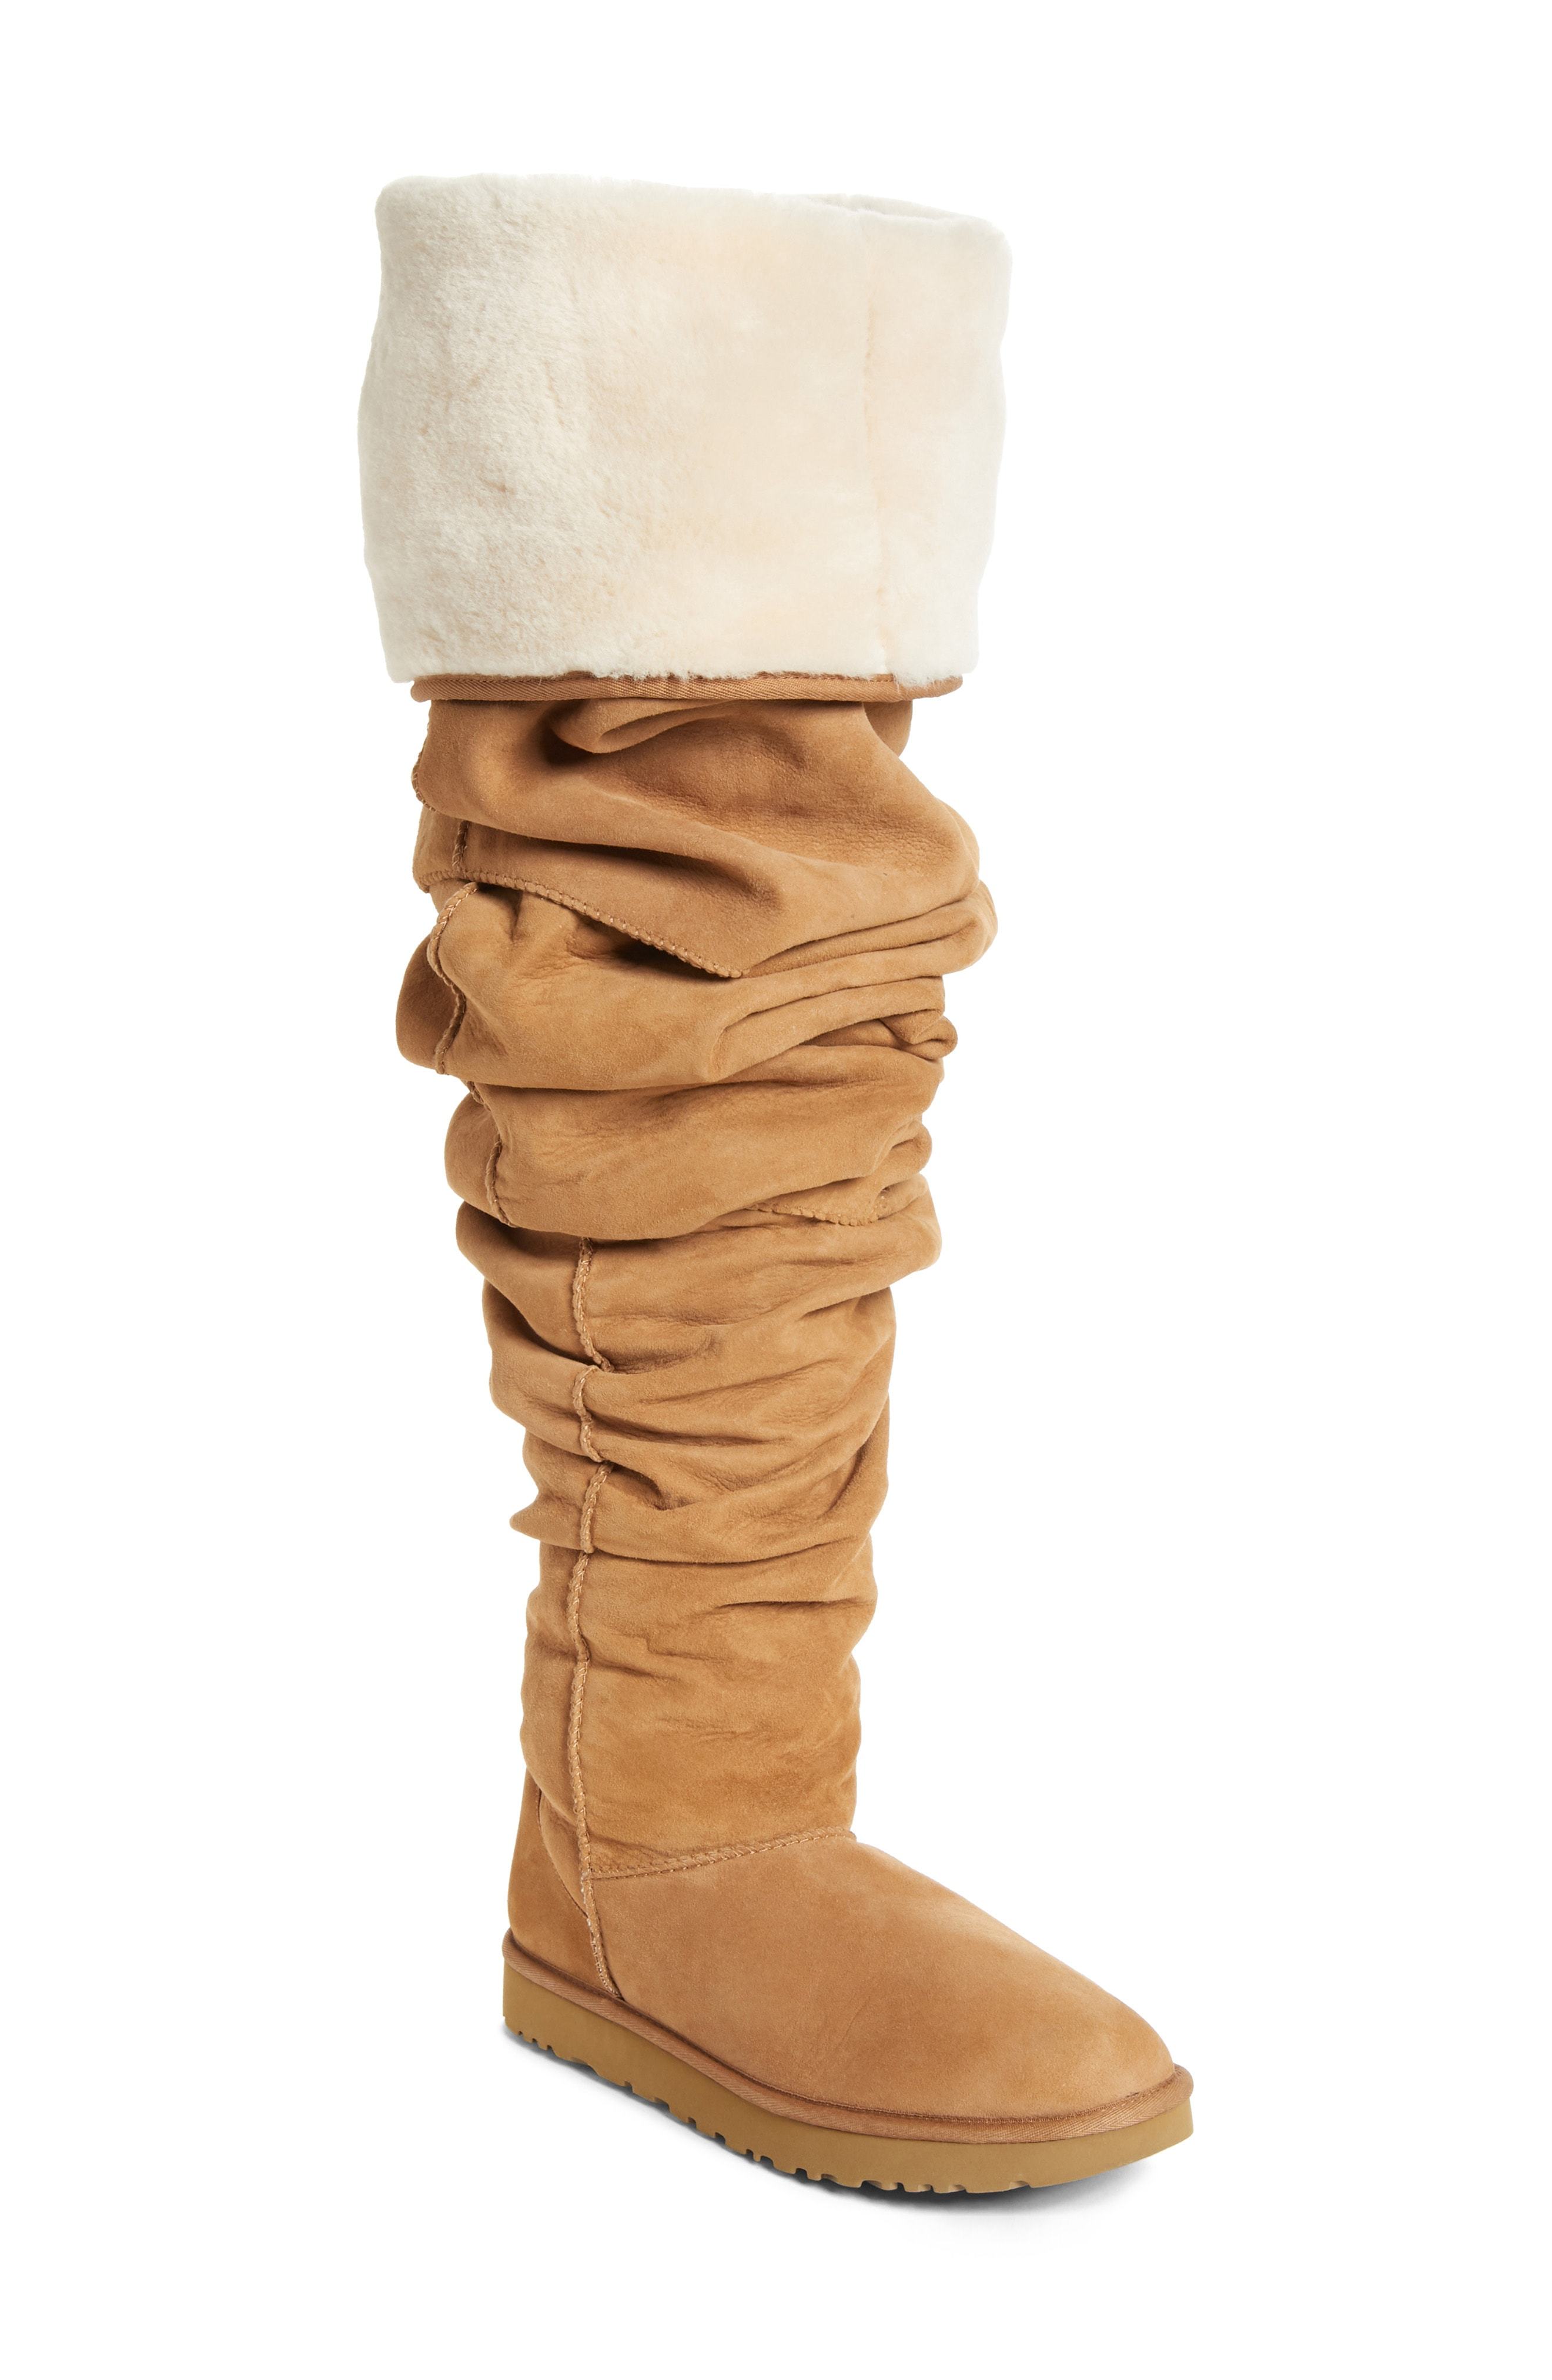 Y/Project X Ugg Thigh High Boot, $1,540 